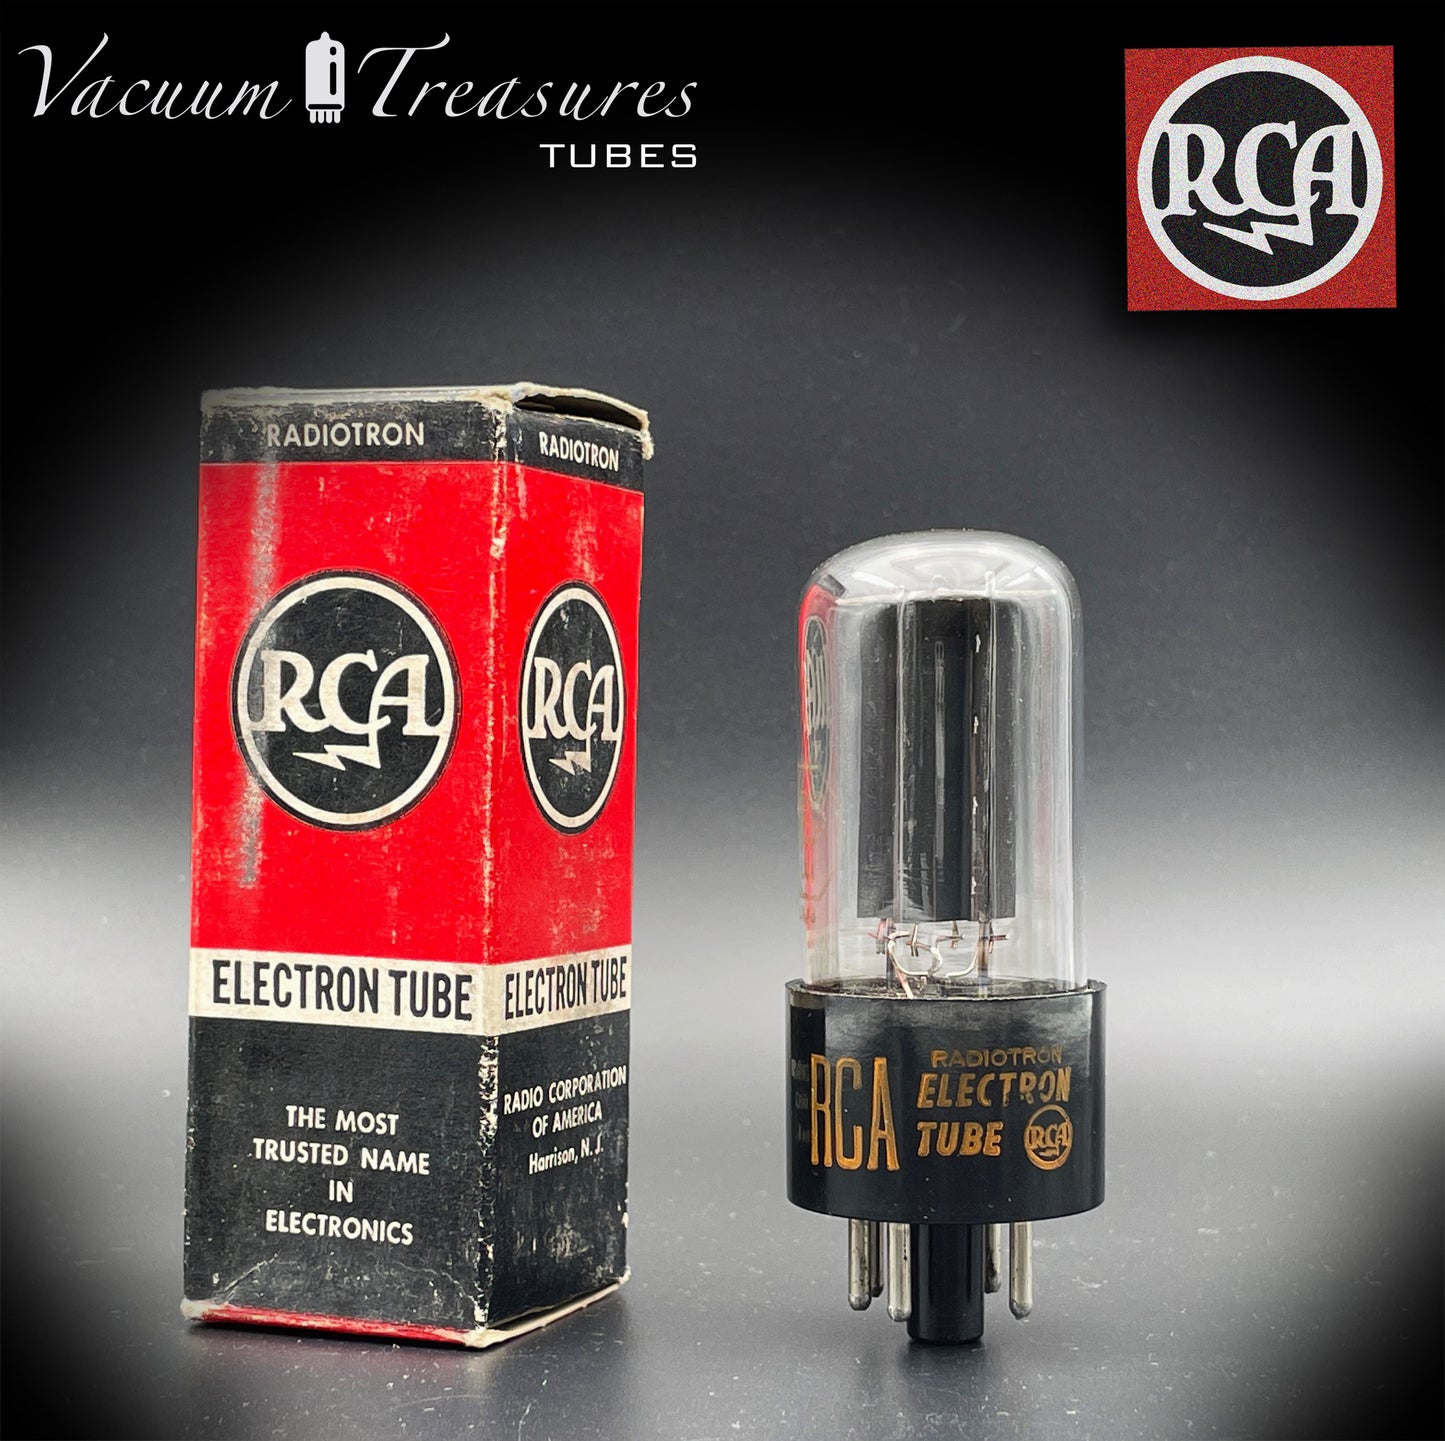 5Y3GT ( 5Z2P ) RCA Black Plates D/[] Getter Tube Rectifier Made in USA '56